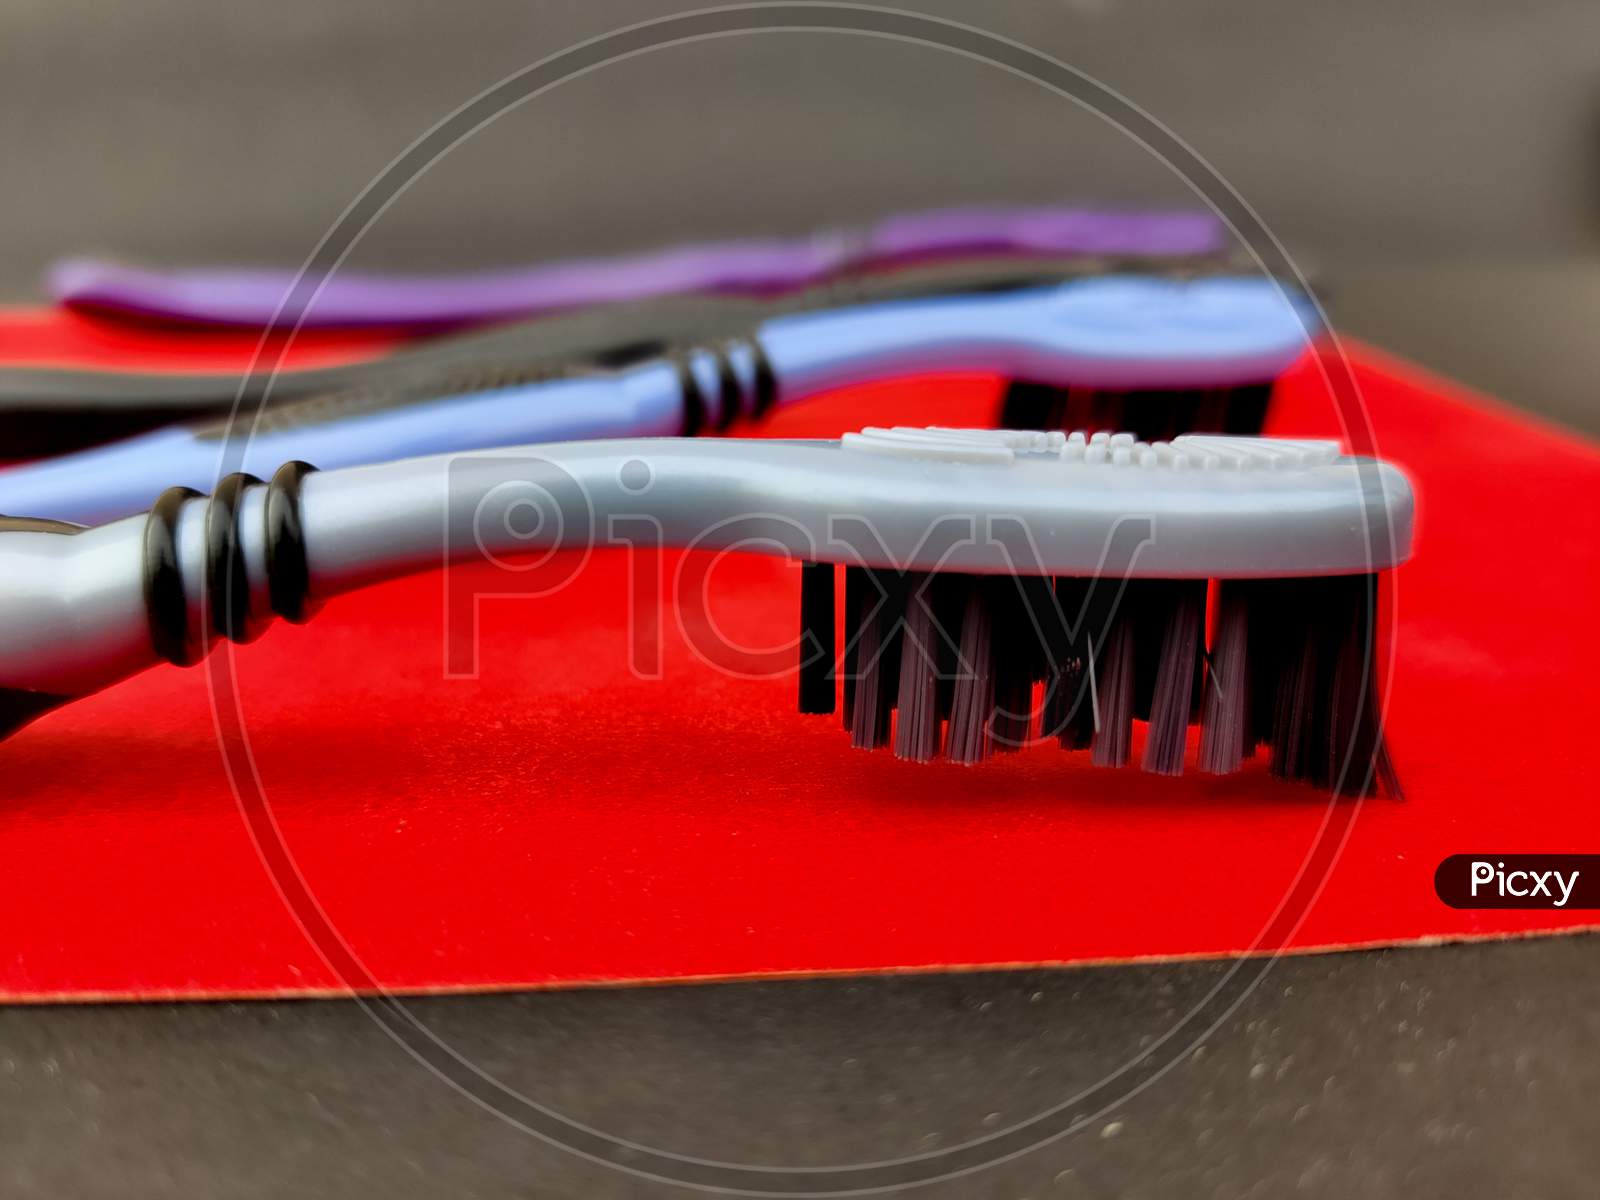 Turn Around Of Grey Tooth Brush With Black Bristle On Red Background